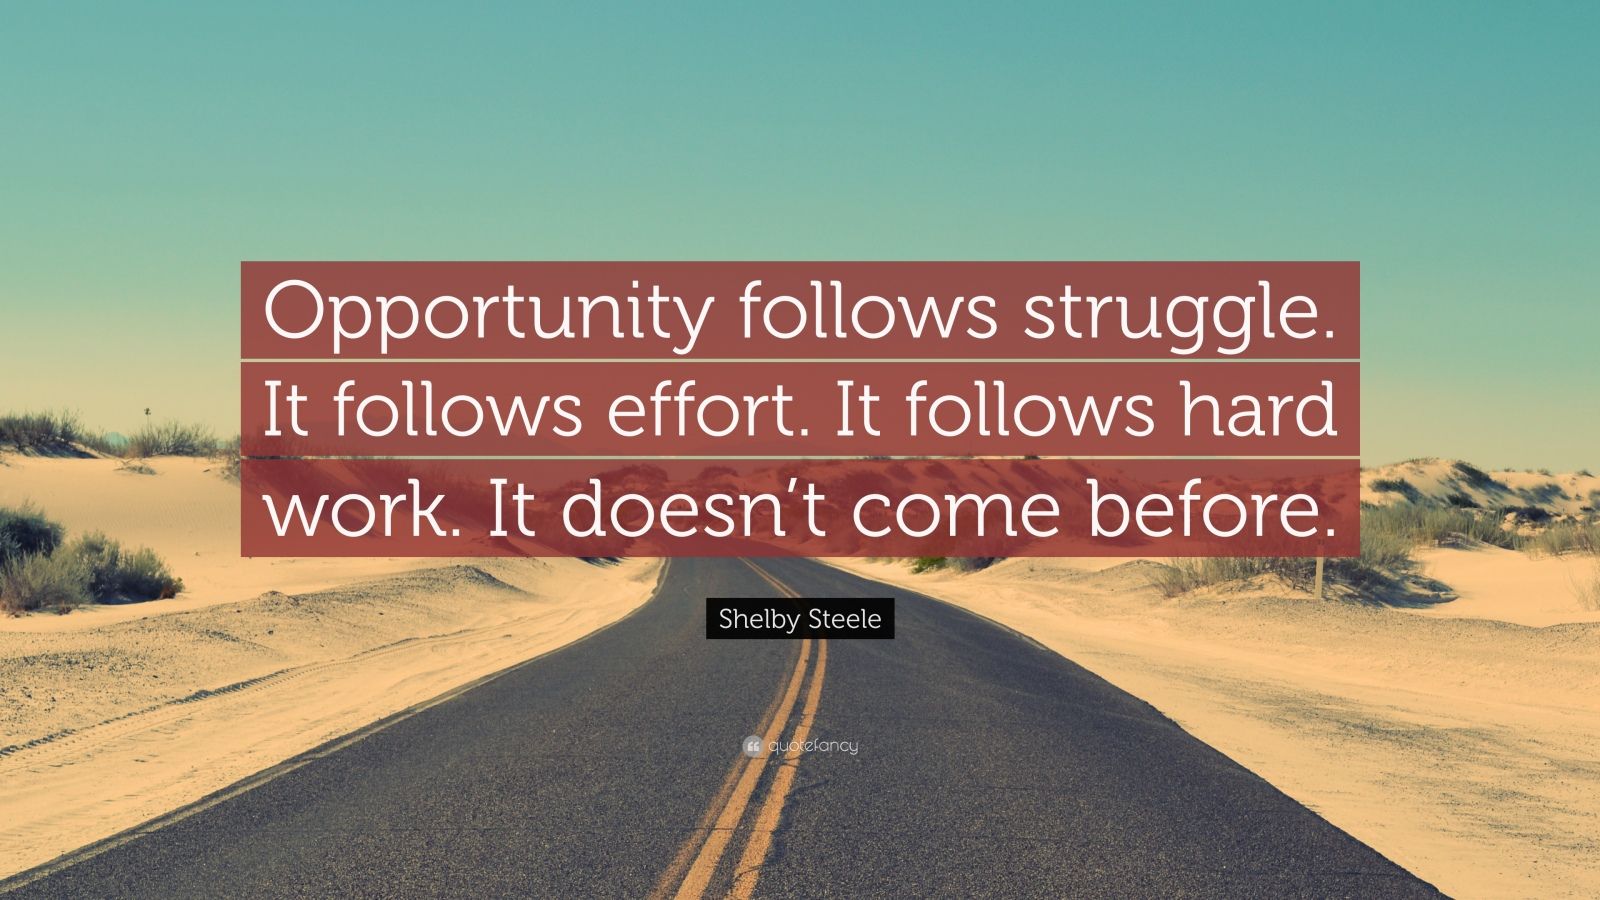 Shelby Steele Quote: “Opportunity follows struggle. It follows effort ...